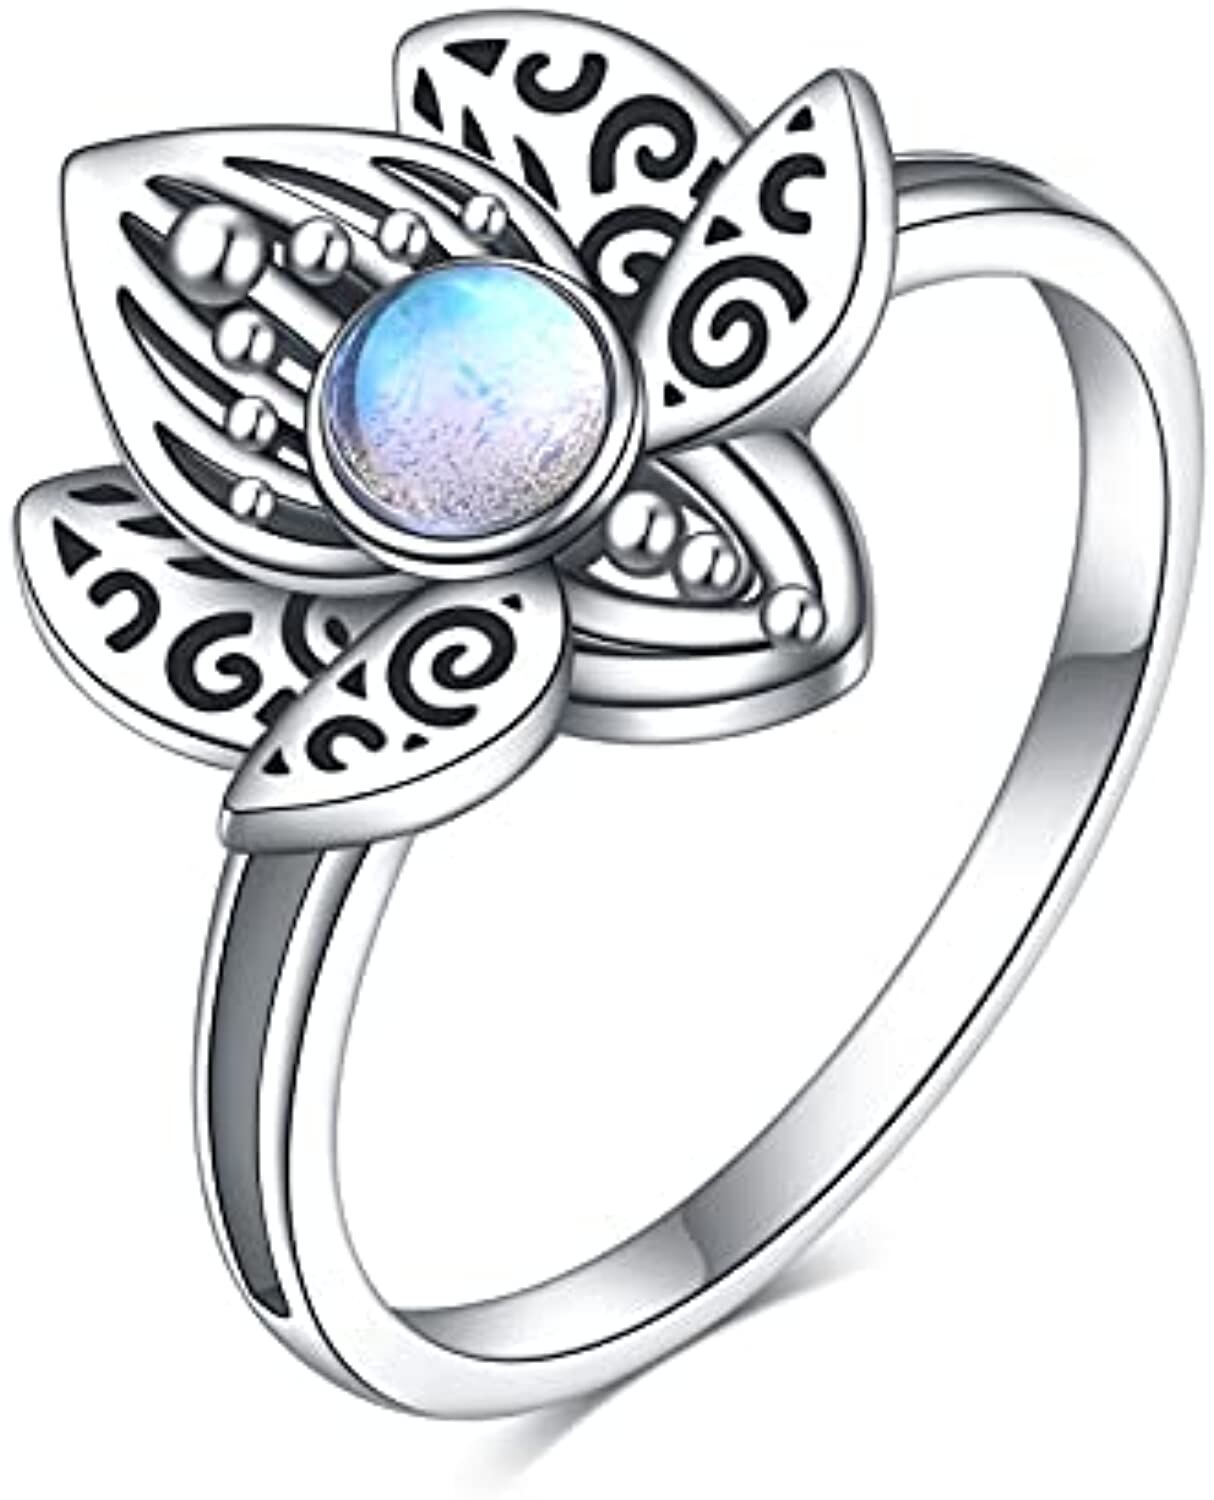 Lotus Flower Ring Sterling Silver Jewelry Gifts for Women - silver